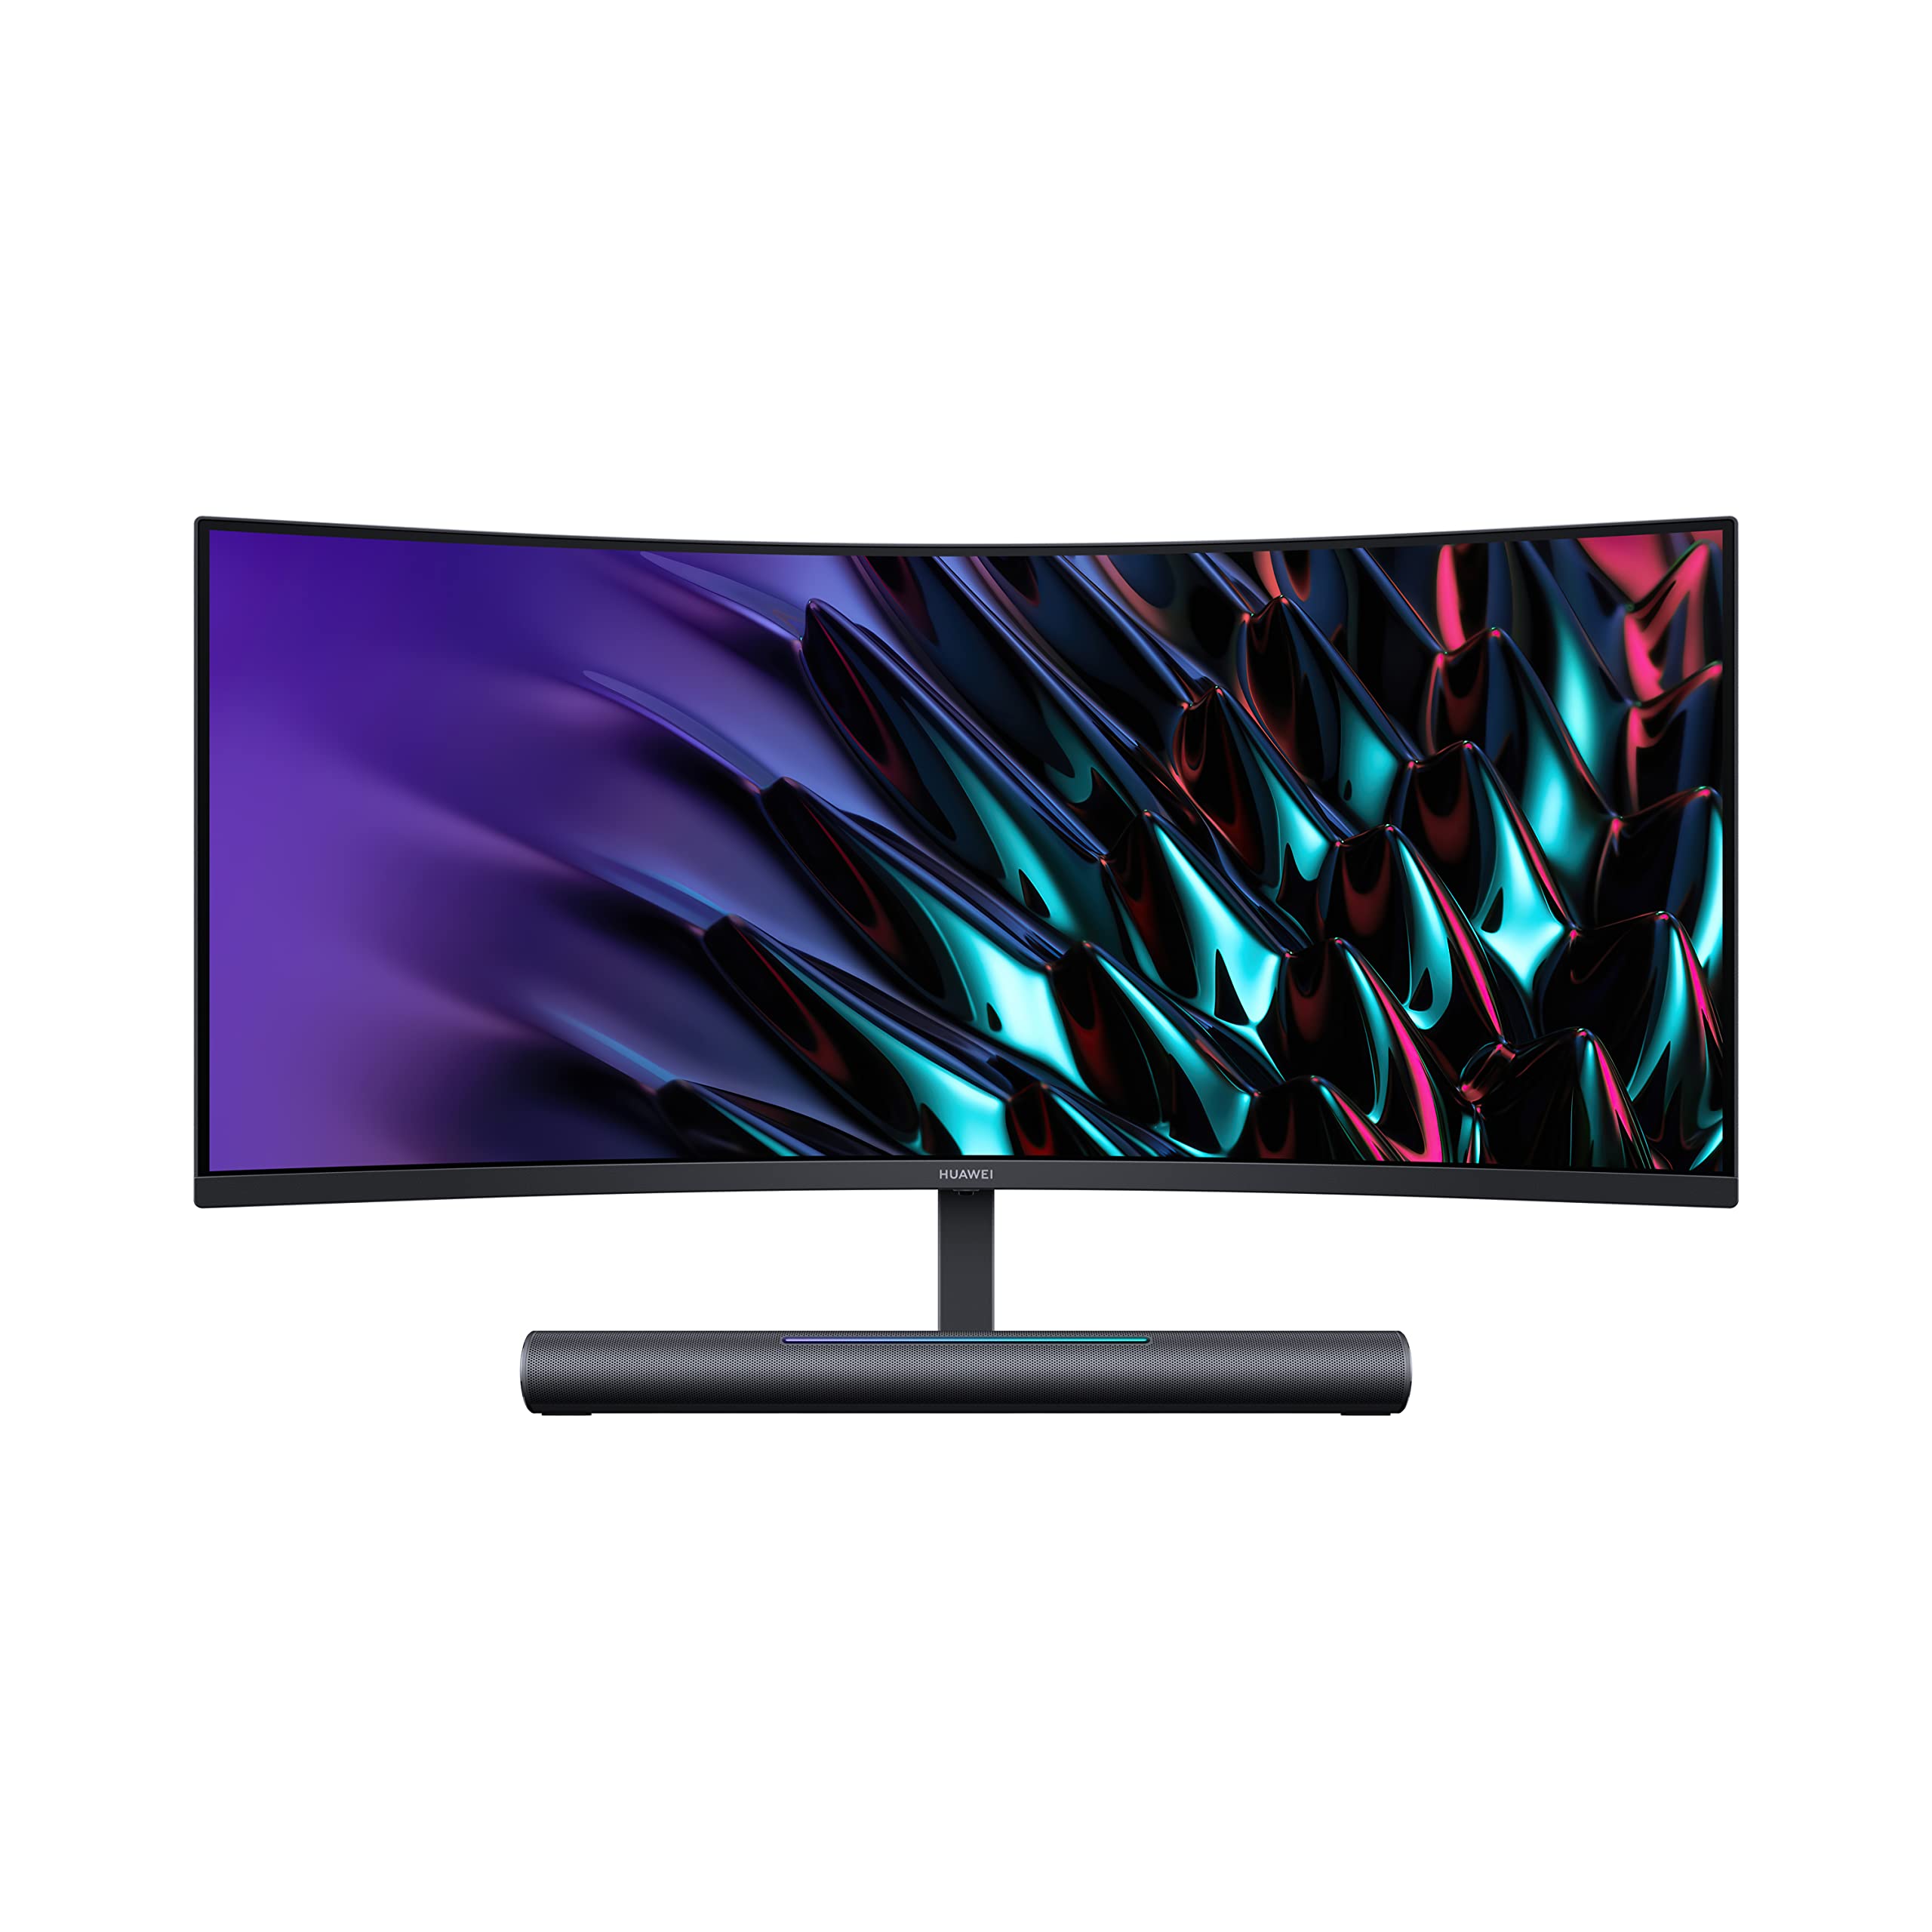 Huawei Mateview GT 34 inch 1500R Curved Gaming Monitor-165Hz Refresh rate, 3440x1440 VA Screen, HDR, HDMI, Display port, Black